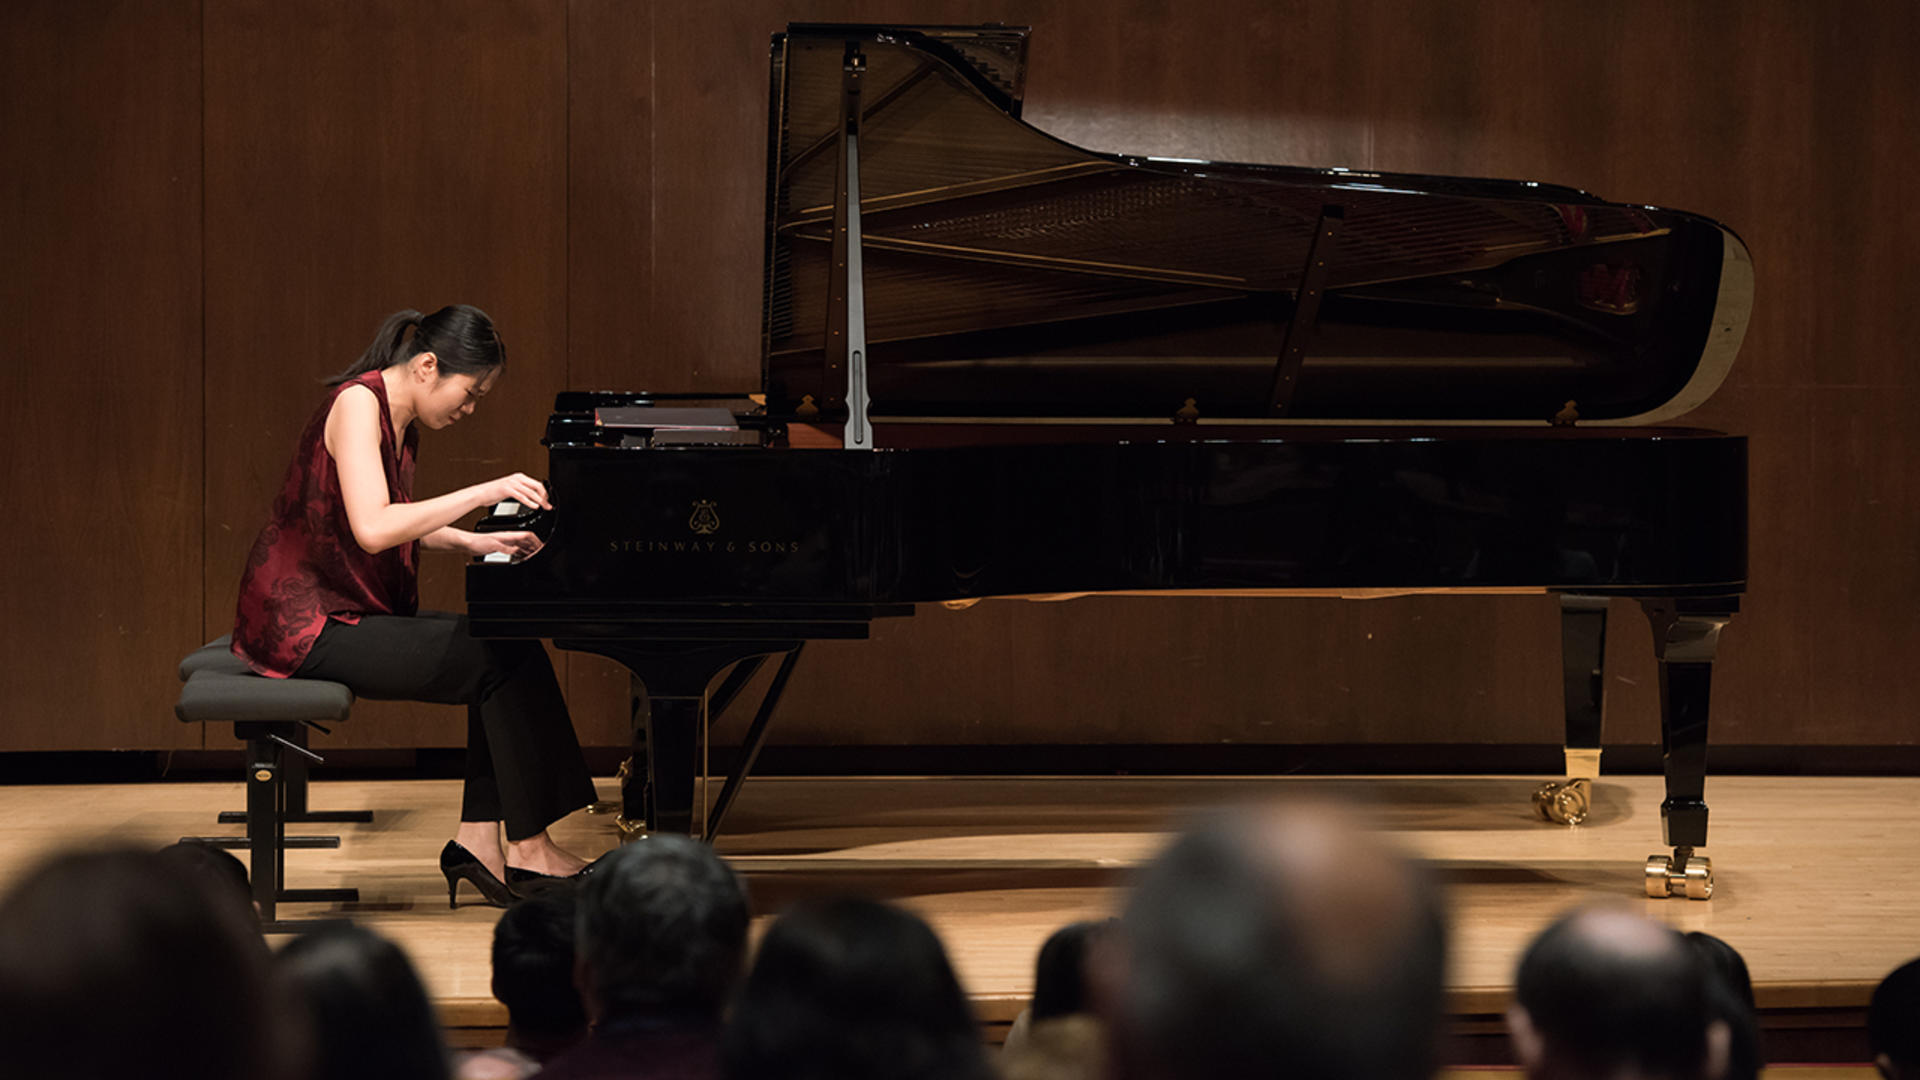 Juilliard Wednesdays at One: Music for Piano, at Lincoln Center